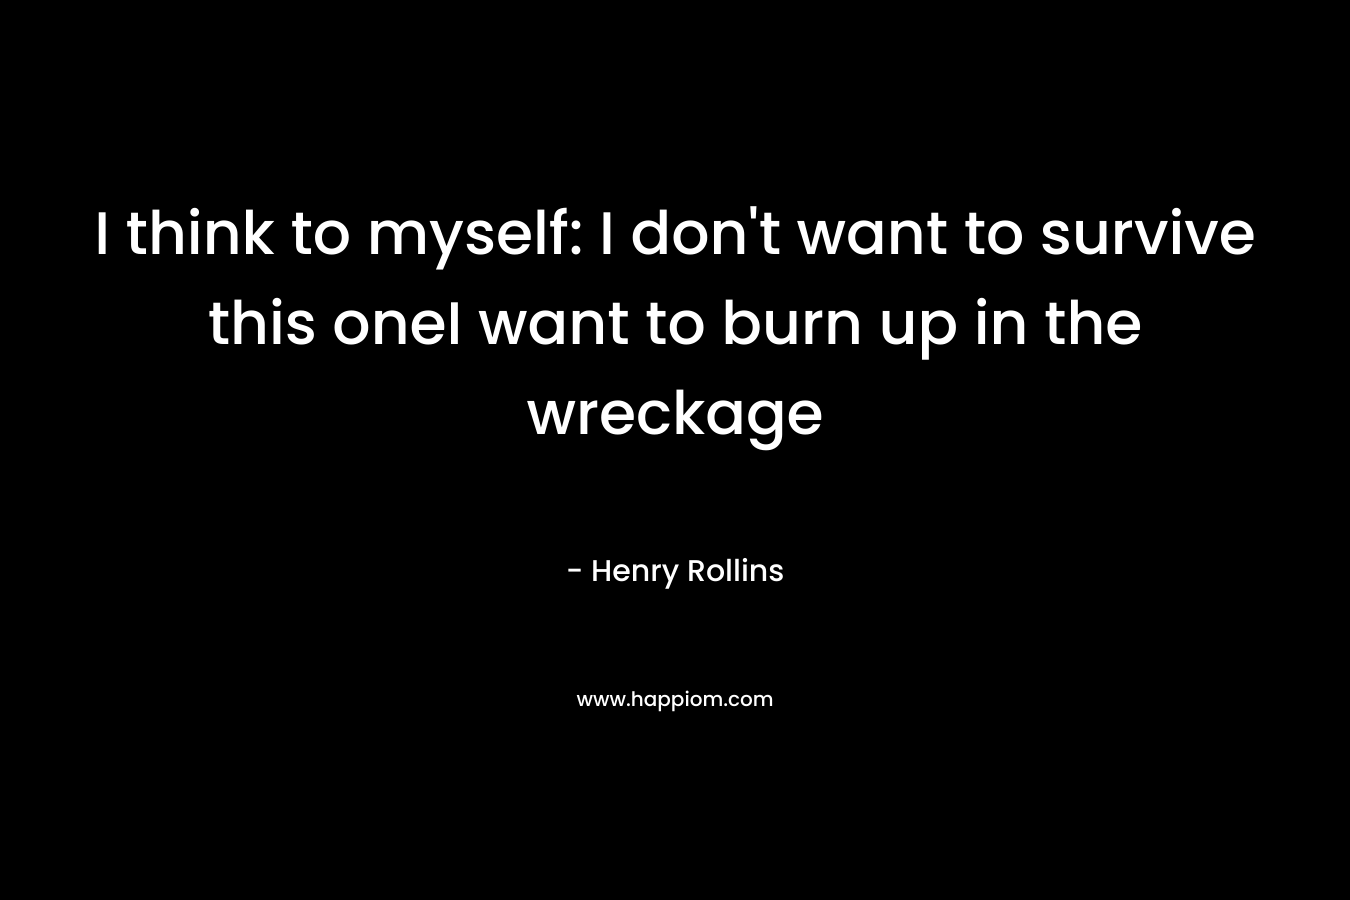 I think to myself: I don’t want to survive this oneI want to burn up in the wreckage – Henry Rollins